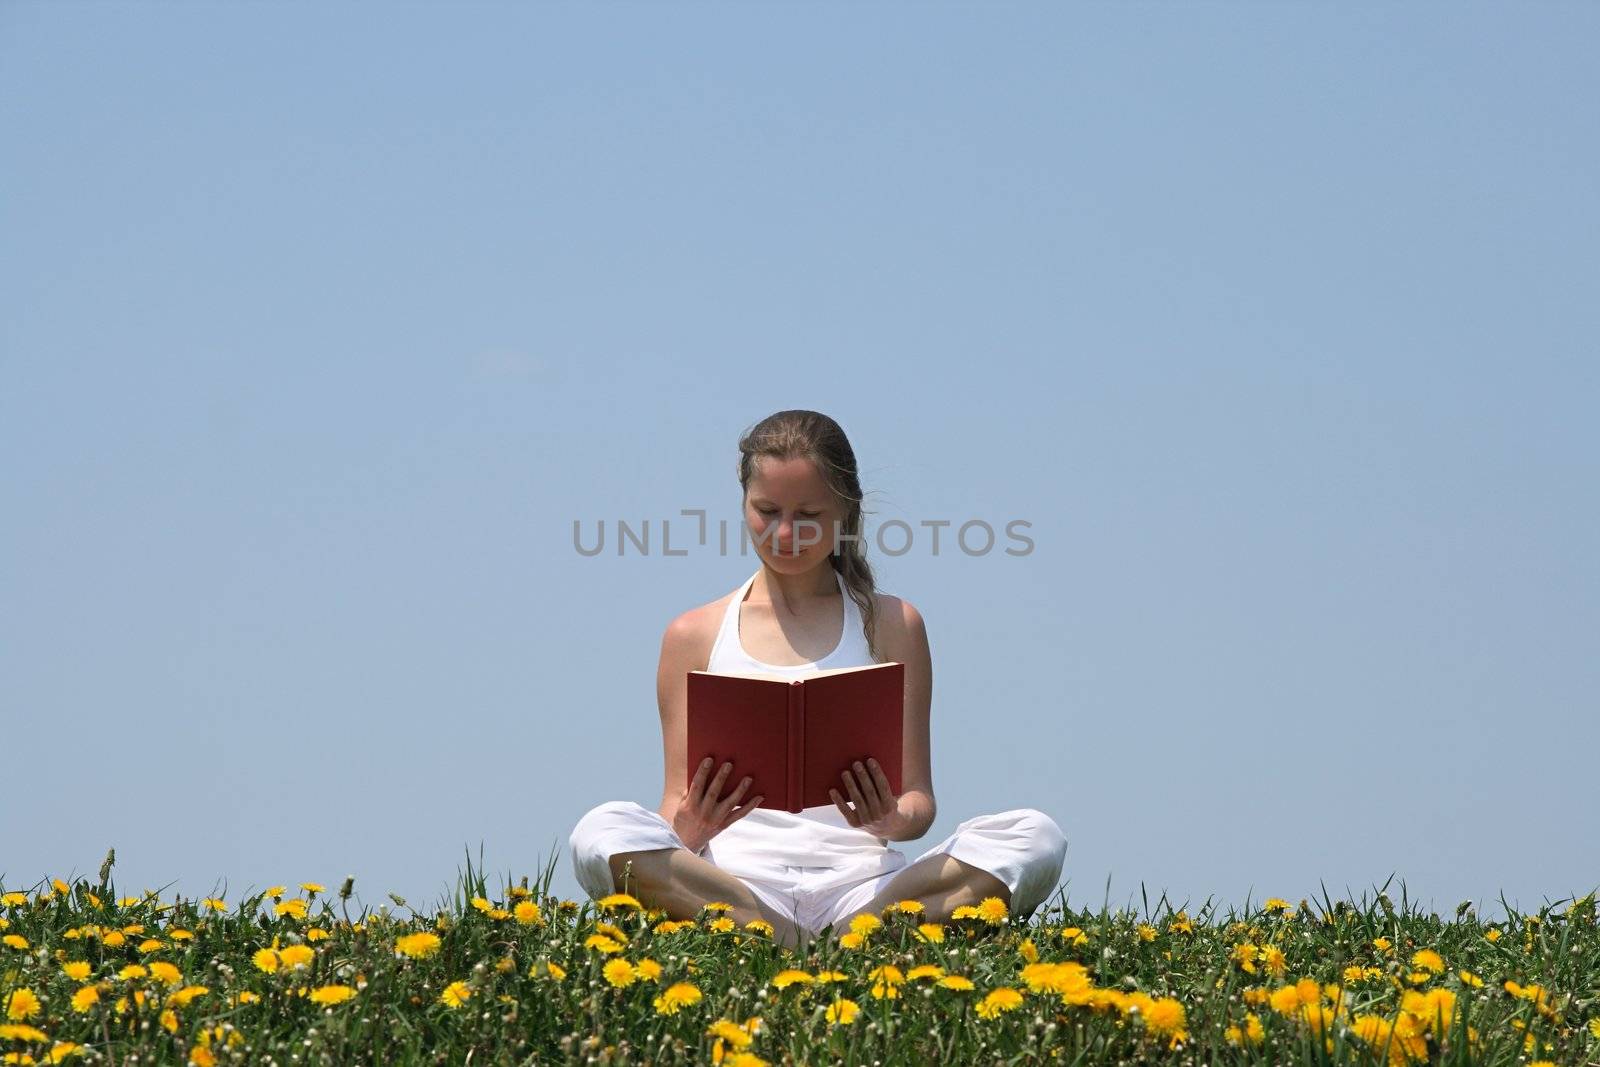 Young woman relaxing and reading a book in a flowering dandelion field.